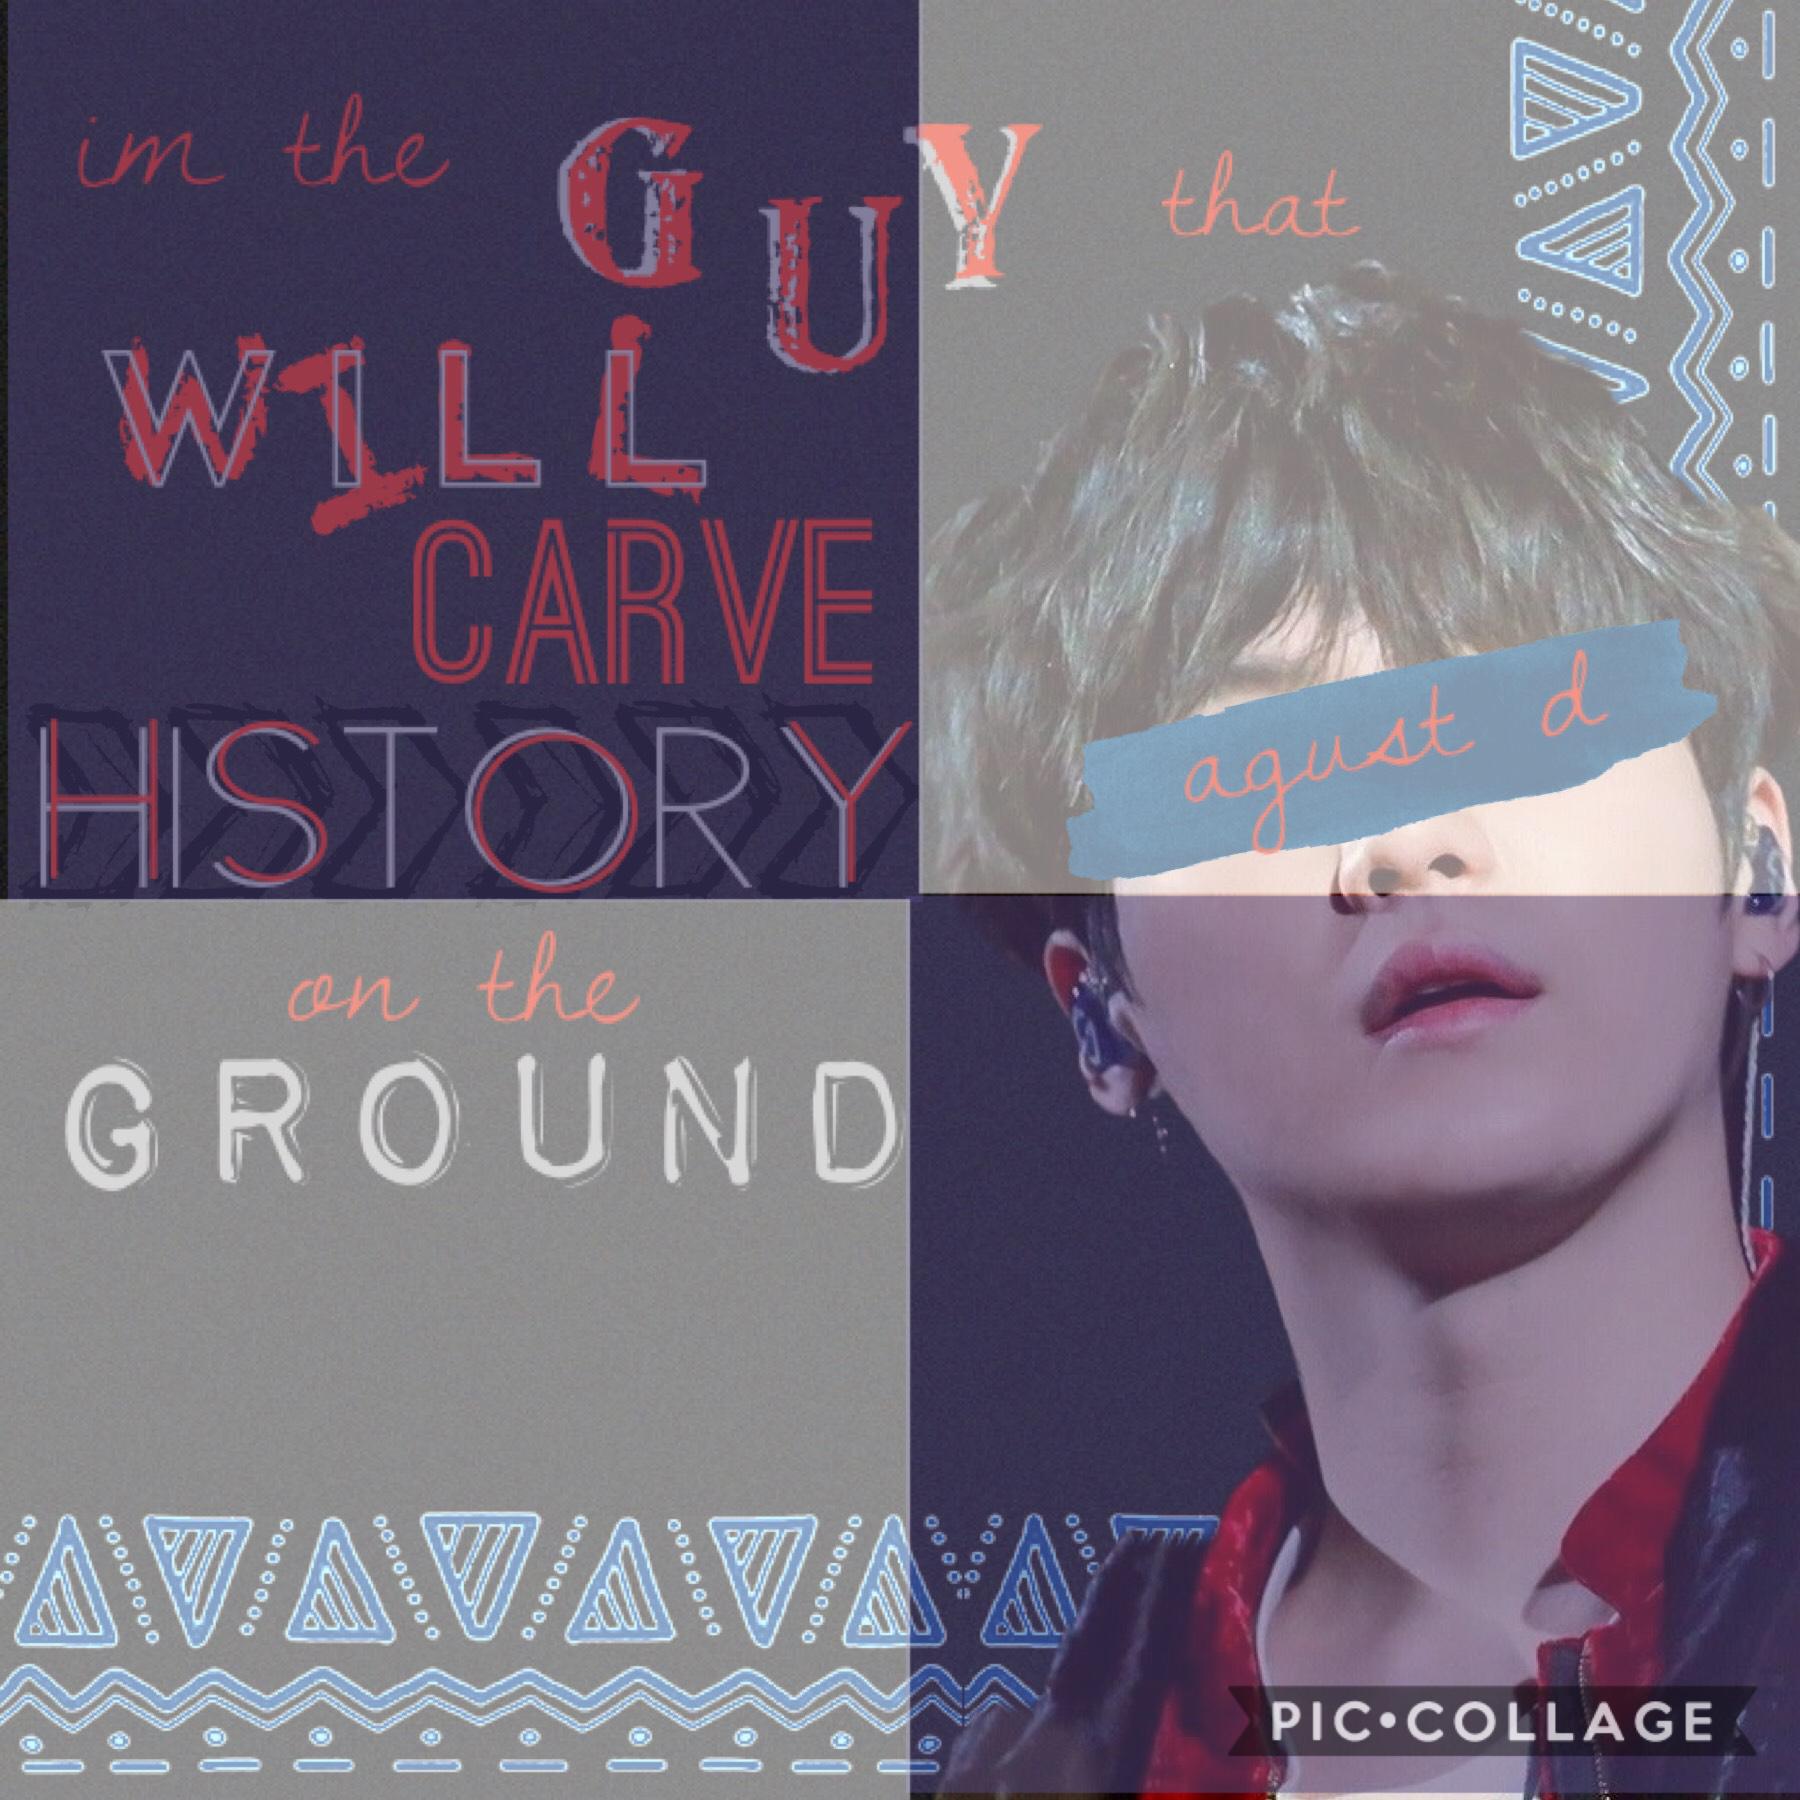 Old edit that I edited, y’all can scroll on my account a bit and can see the old version💙💚💛dIrEcT qUoTeS frOmM aGuSt D yAlL sHouLd KnOw